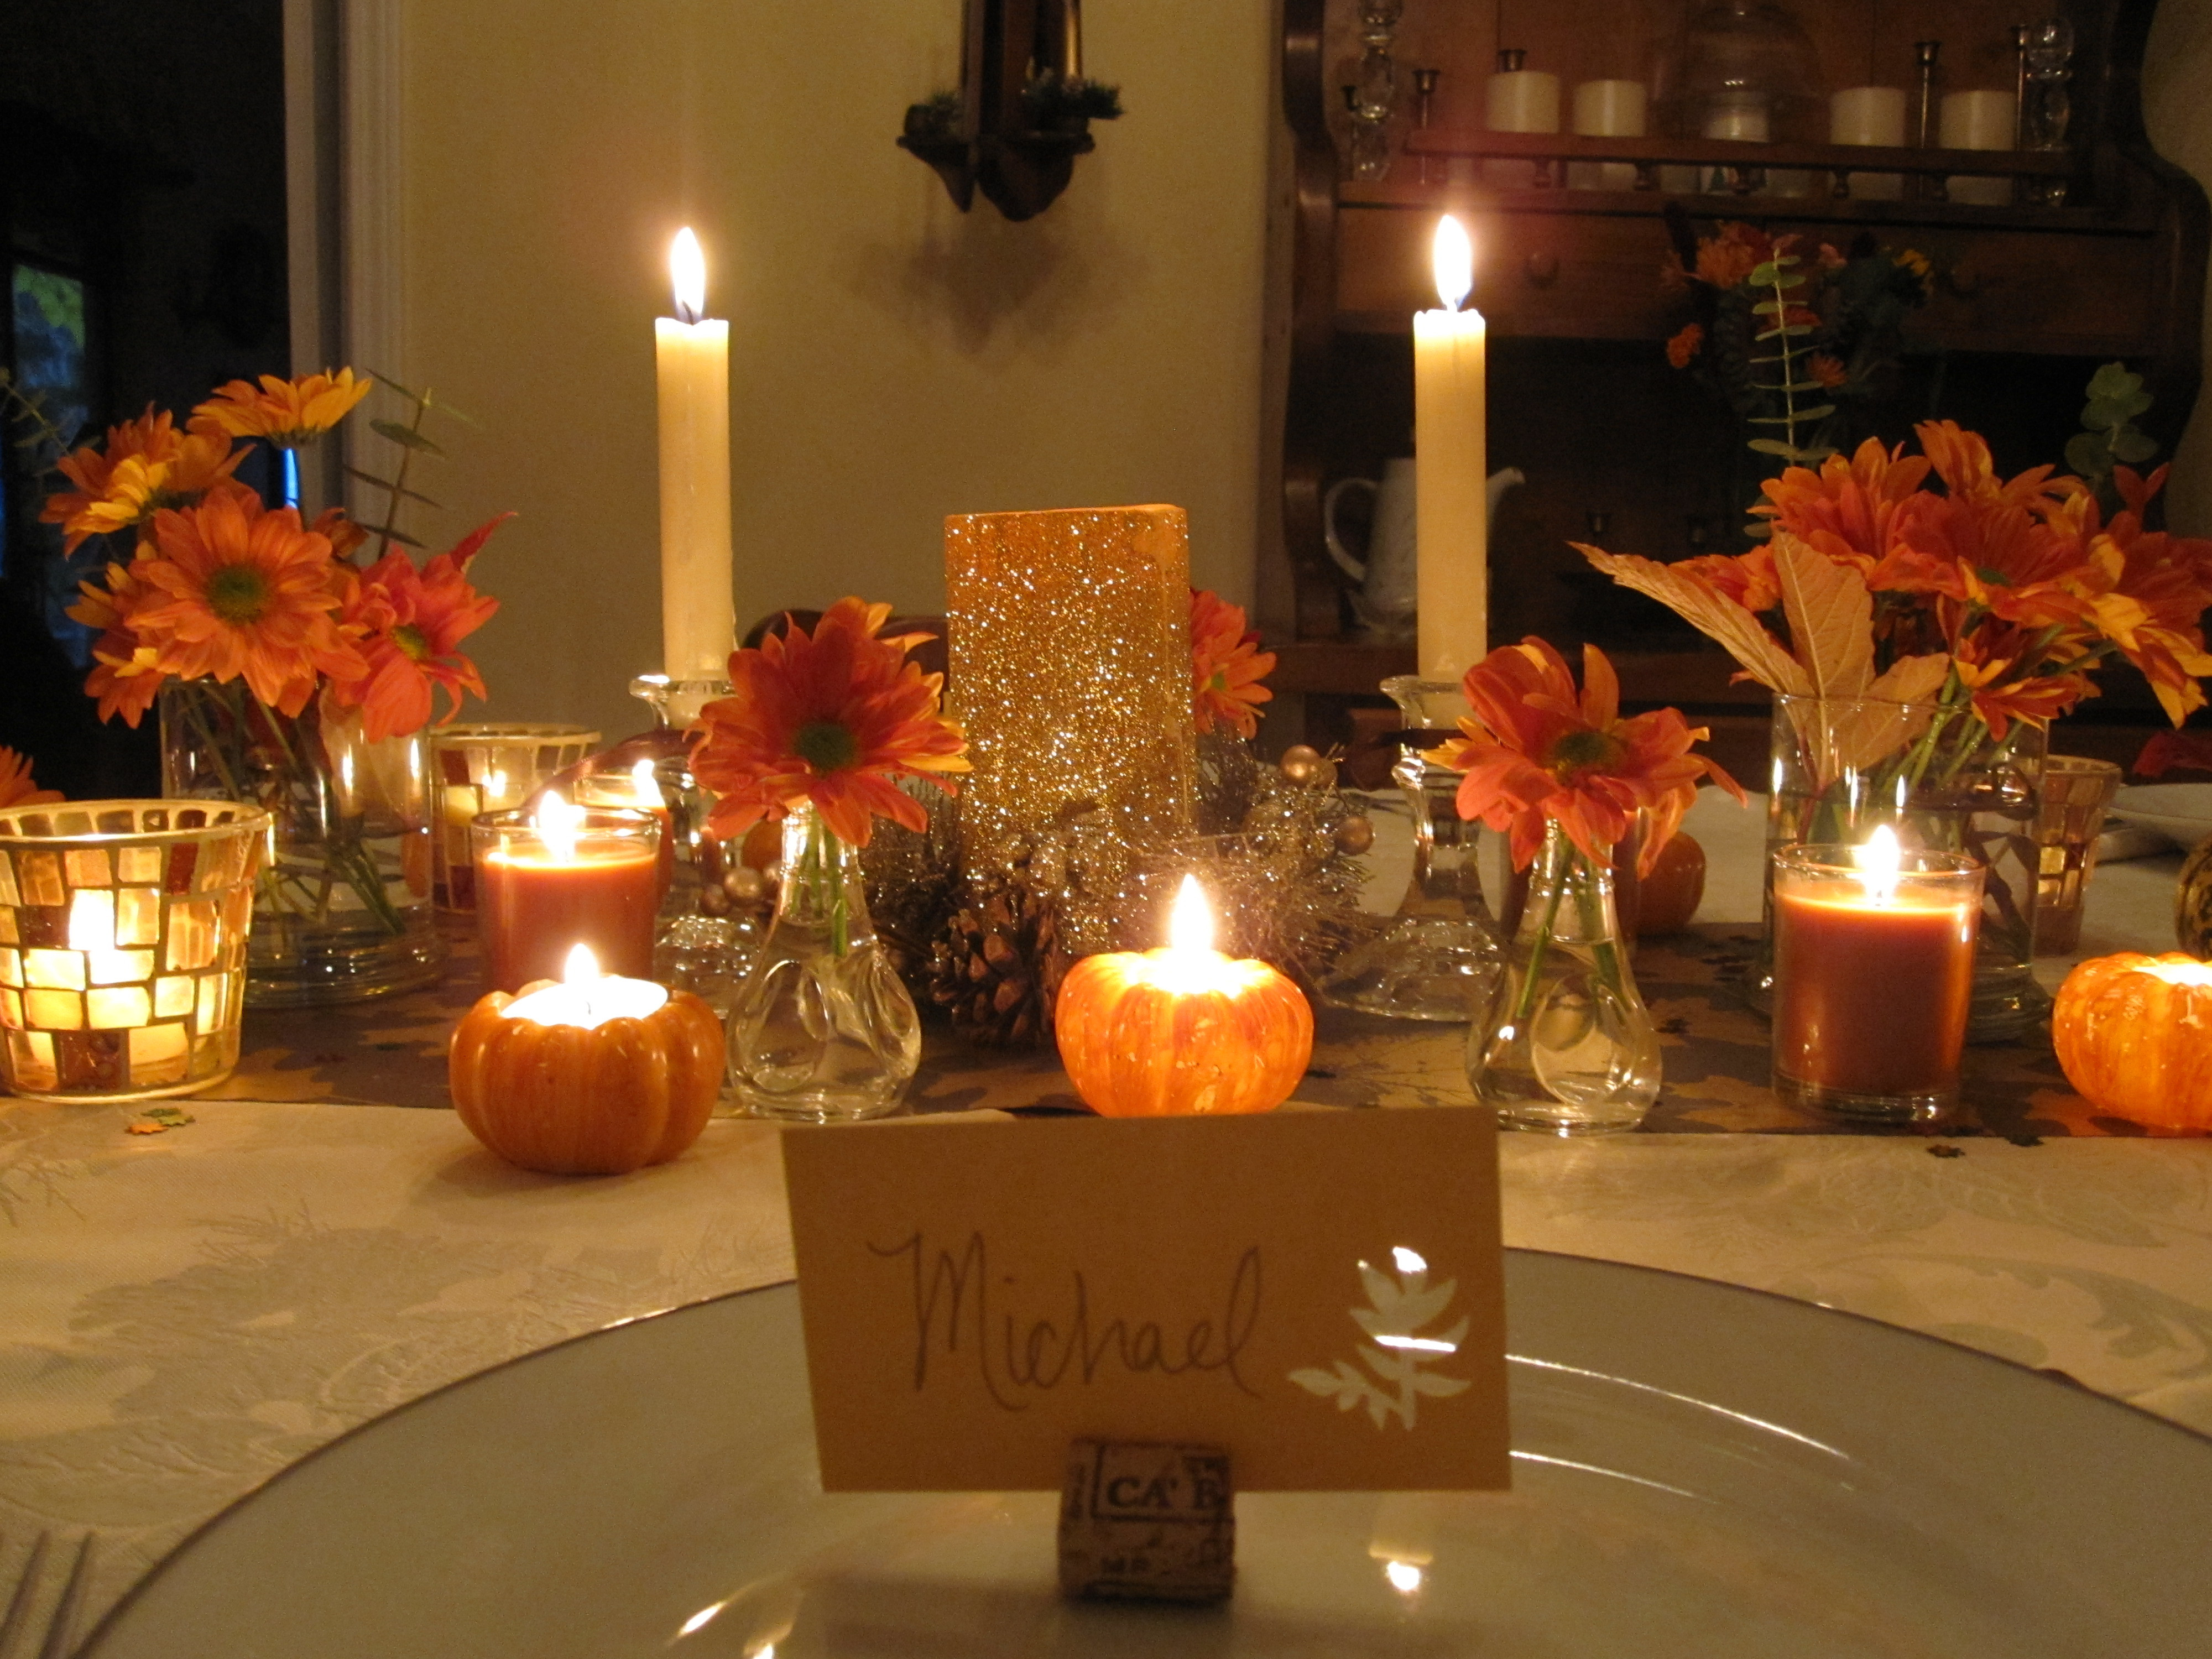 Thanksgiving Table Decorating Ideas
 My Thanksgiving Table